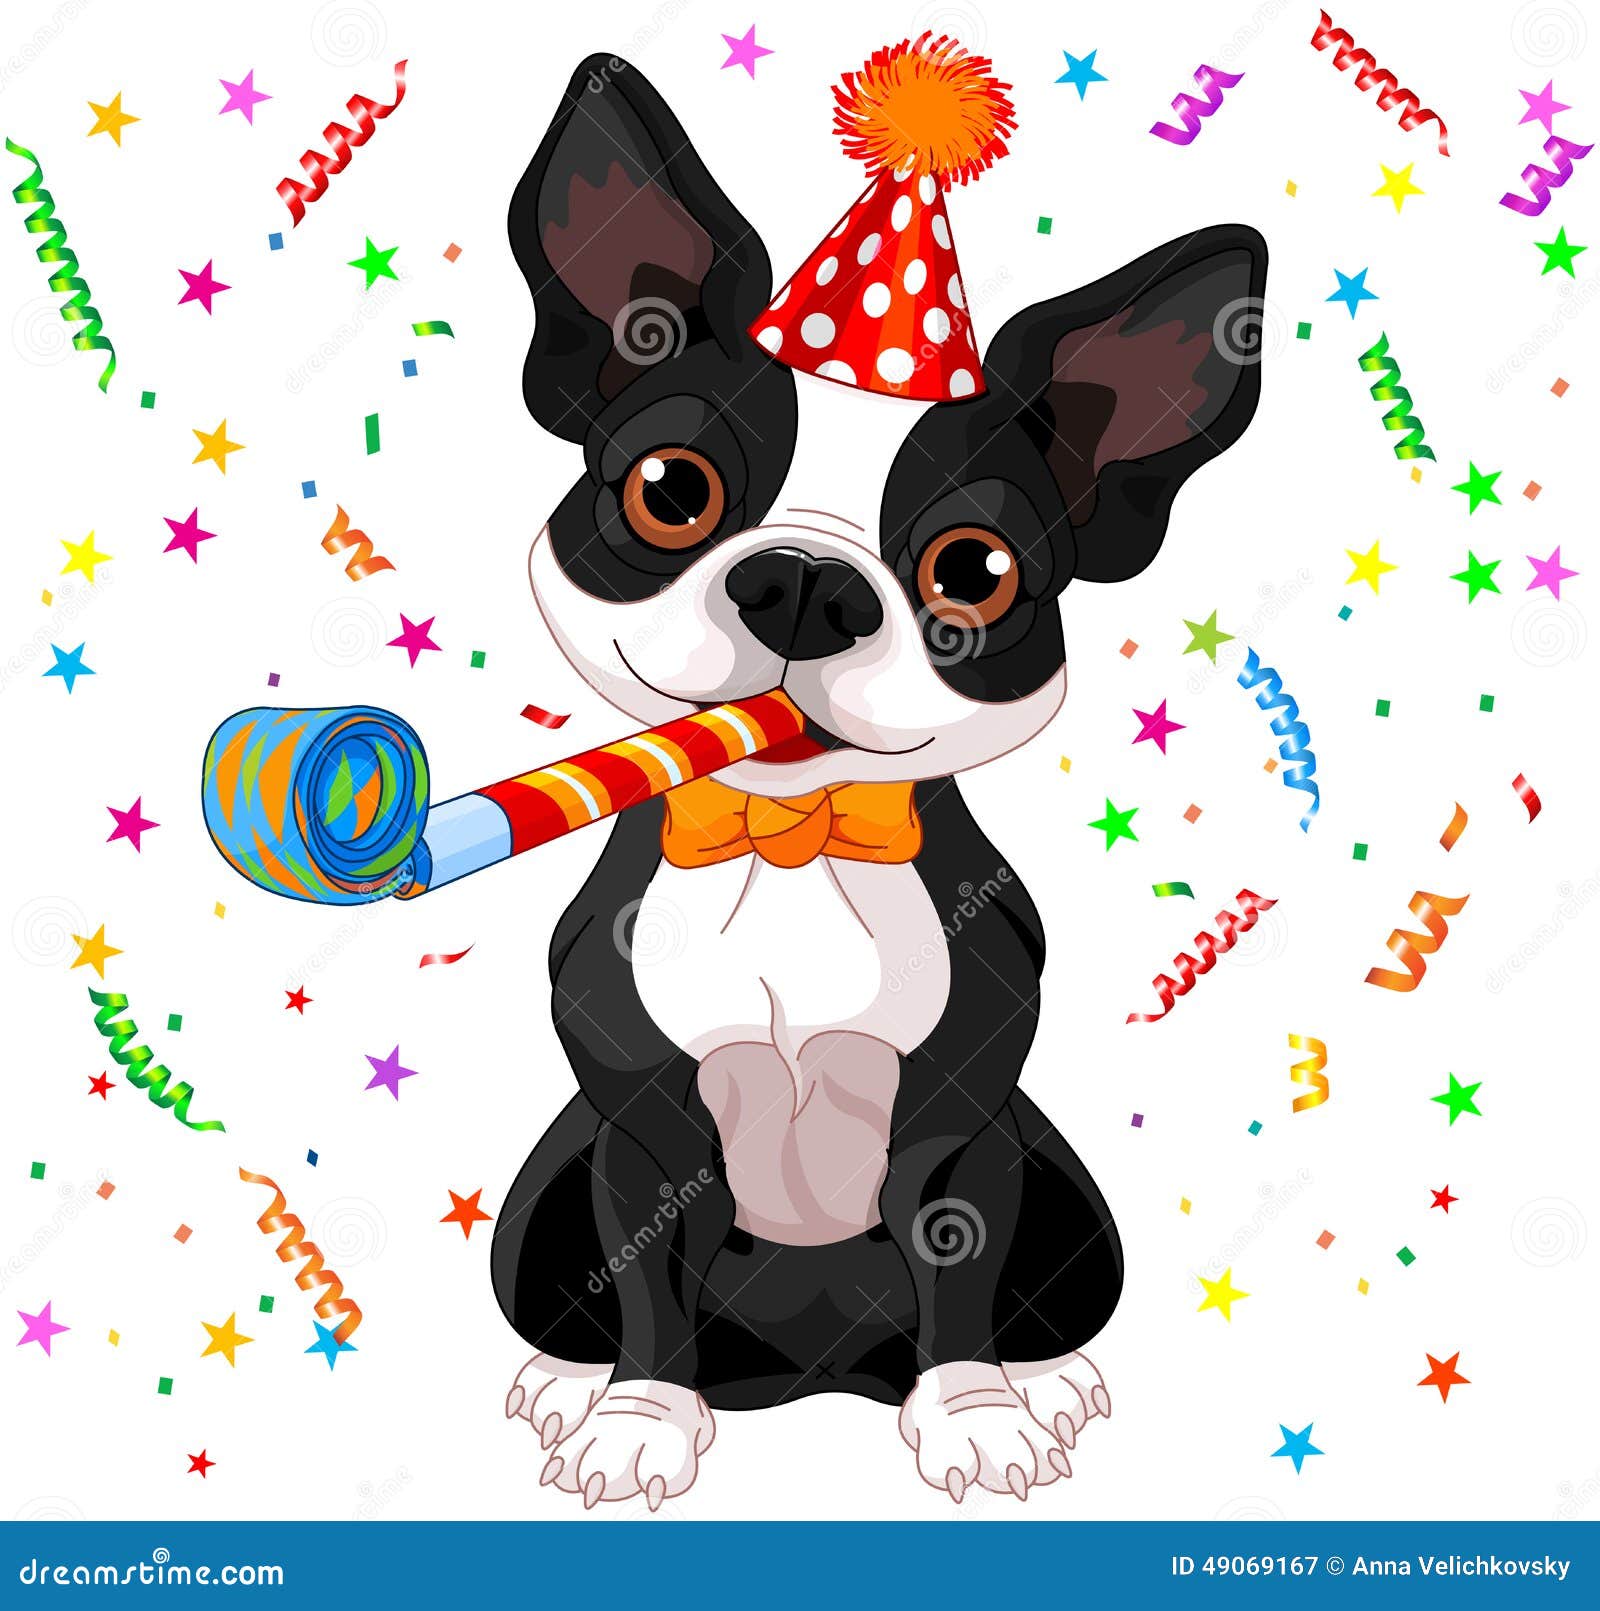 Boston Terrier Party Stock Vector - Image: 49069167